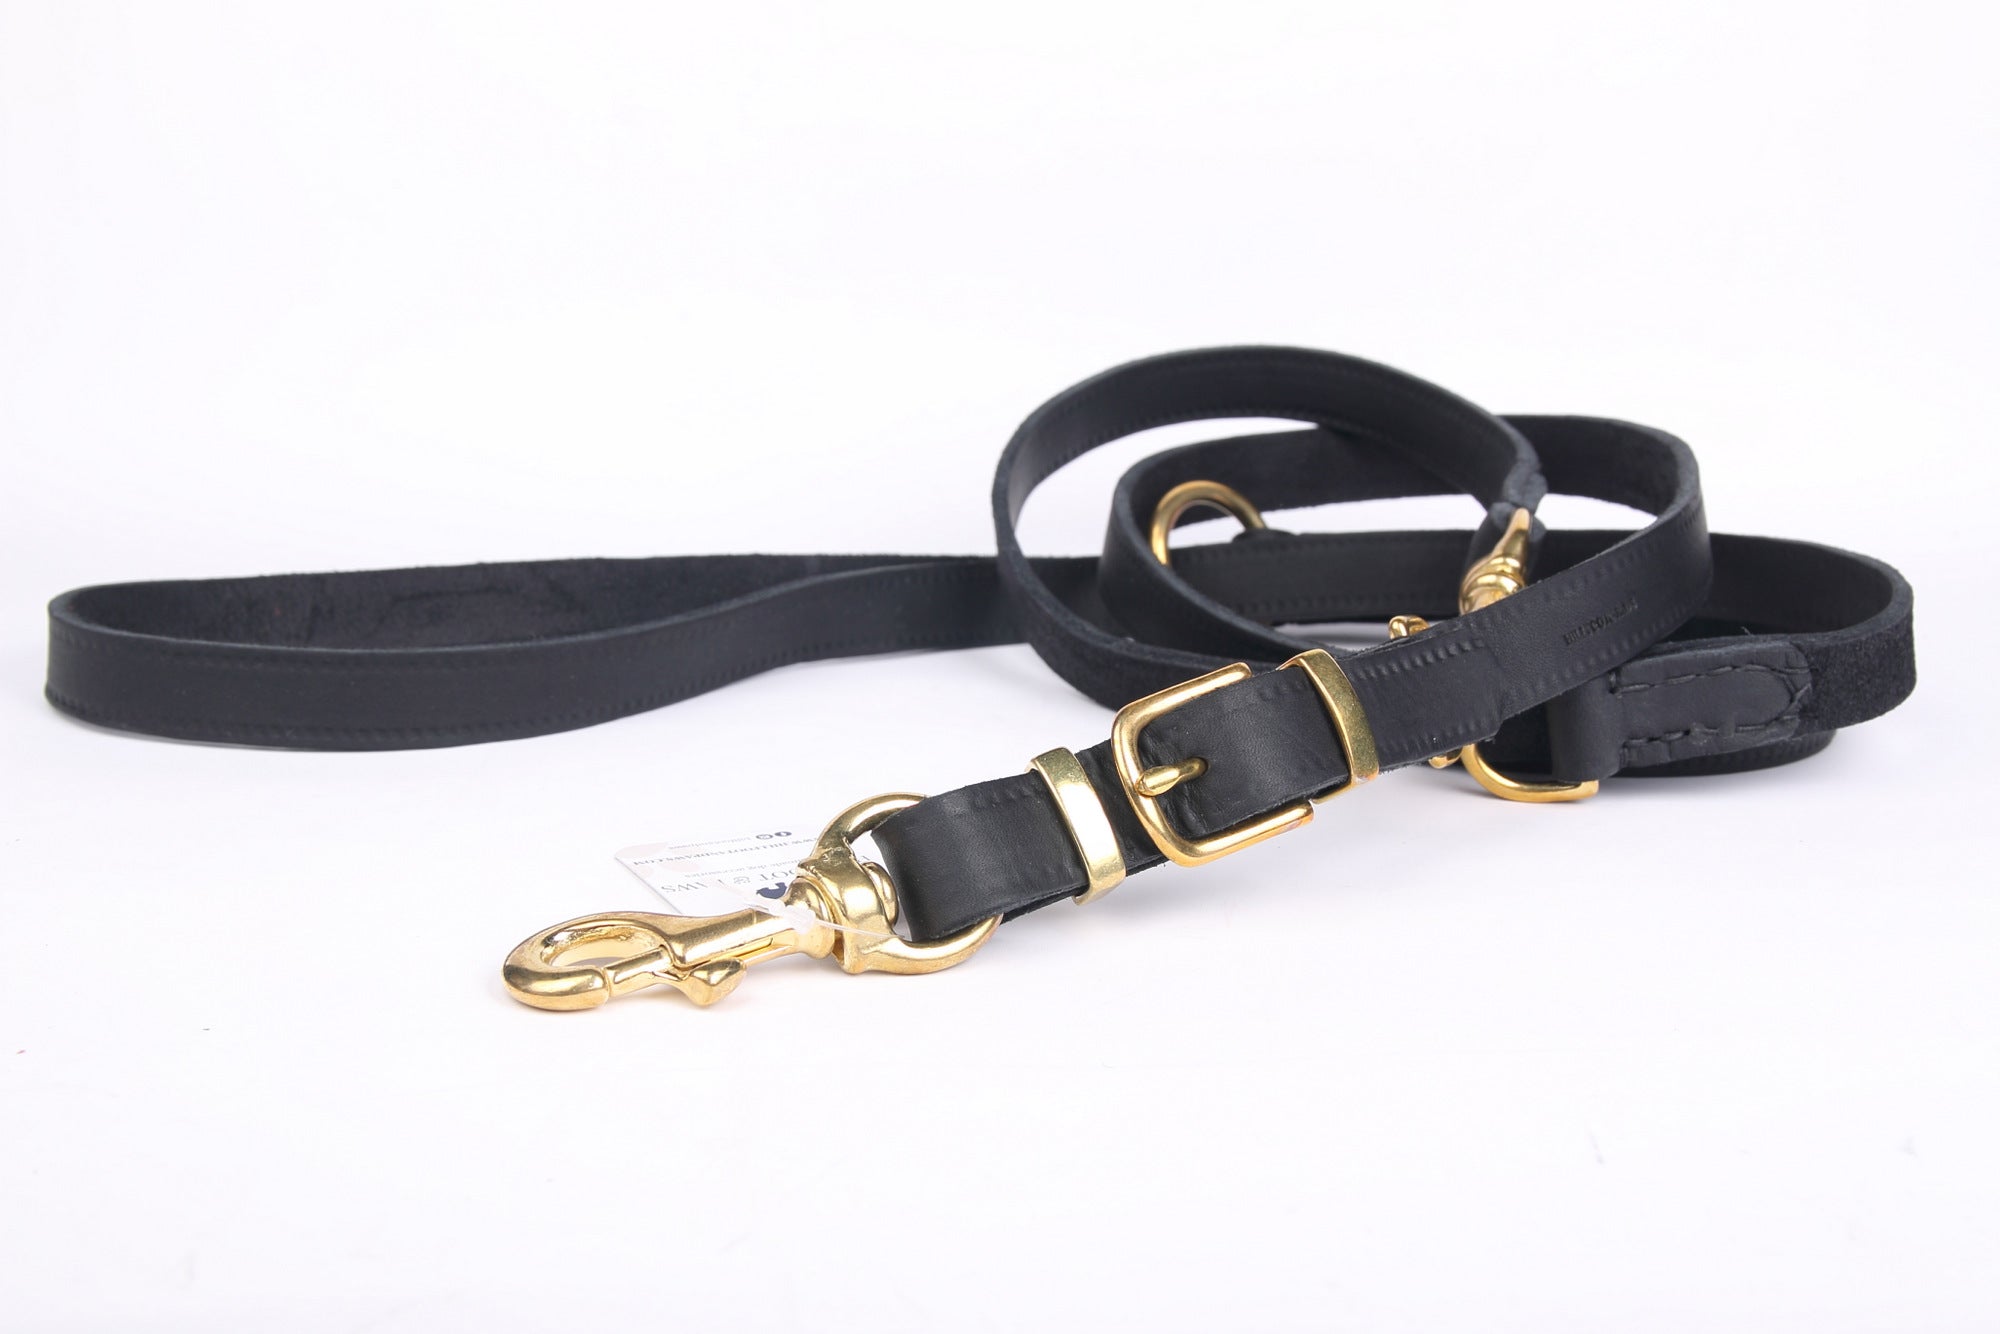 Hillfoot Exclusive Black & Gold Chrome Leather Dog Leash